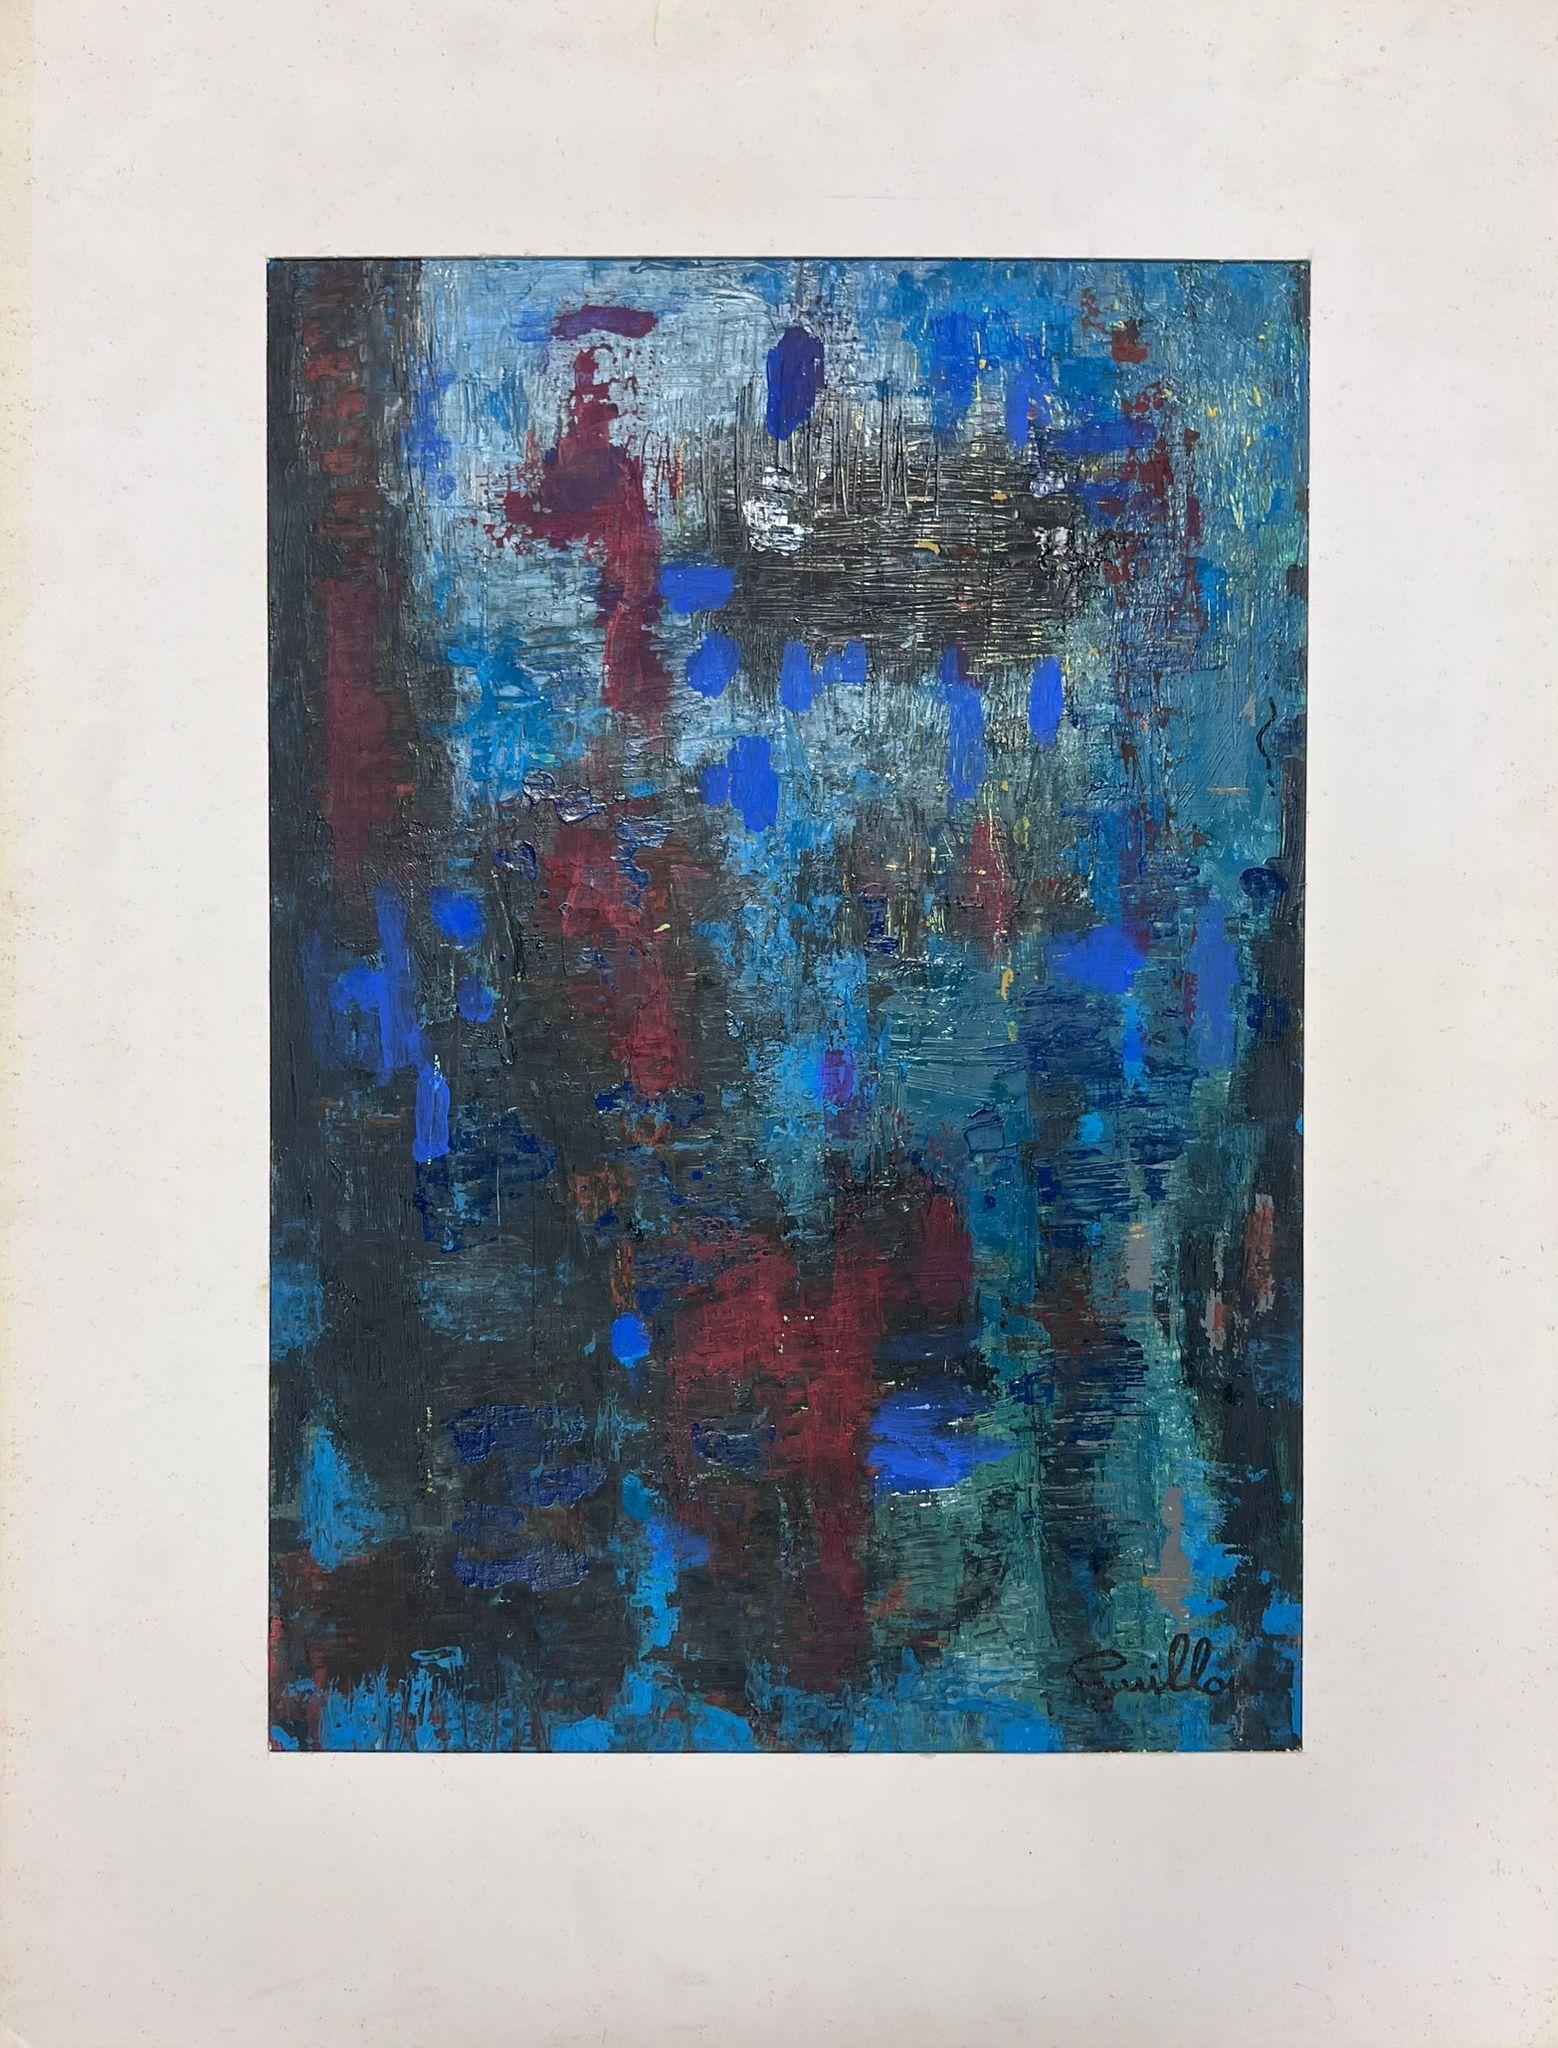 Abstract Expressionist composition
by Andre Guillou (French 1925-2017) 
signed oil on board stuck on board, mounted
mount: 25.5 x 19.75 inches
board: 18.5 x 12.75 inches
provenance: the artists estate, France
condition: very good and sound condition